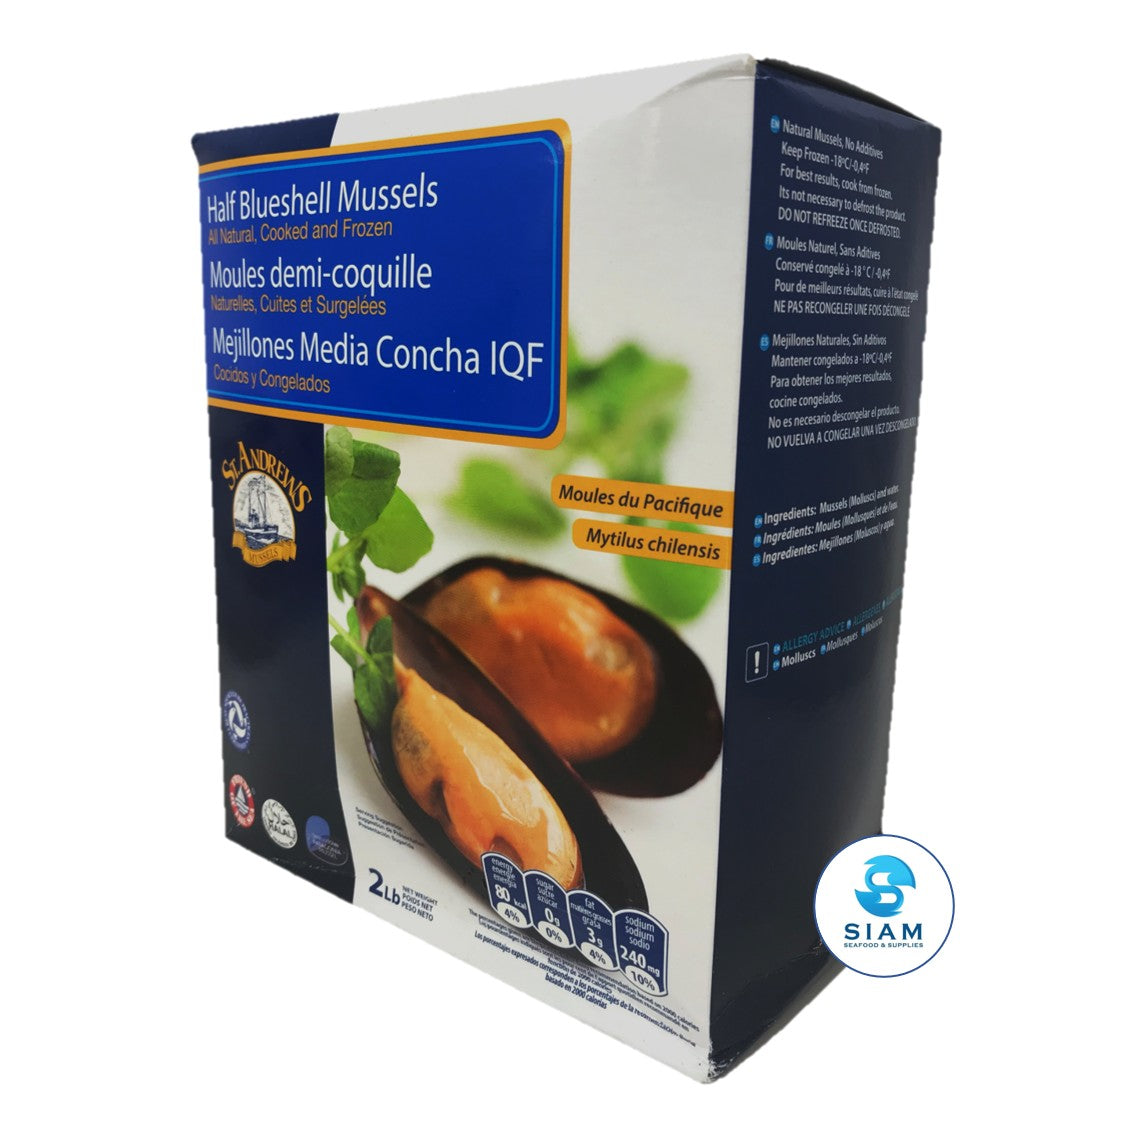 Mussels, Half Shell - Black Chillian, Frozen (2 lbs bag-$4.60/lb) Brand may vary